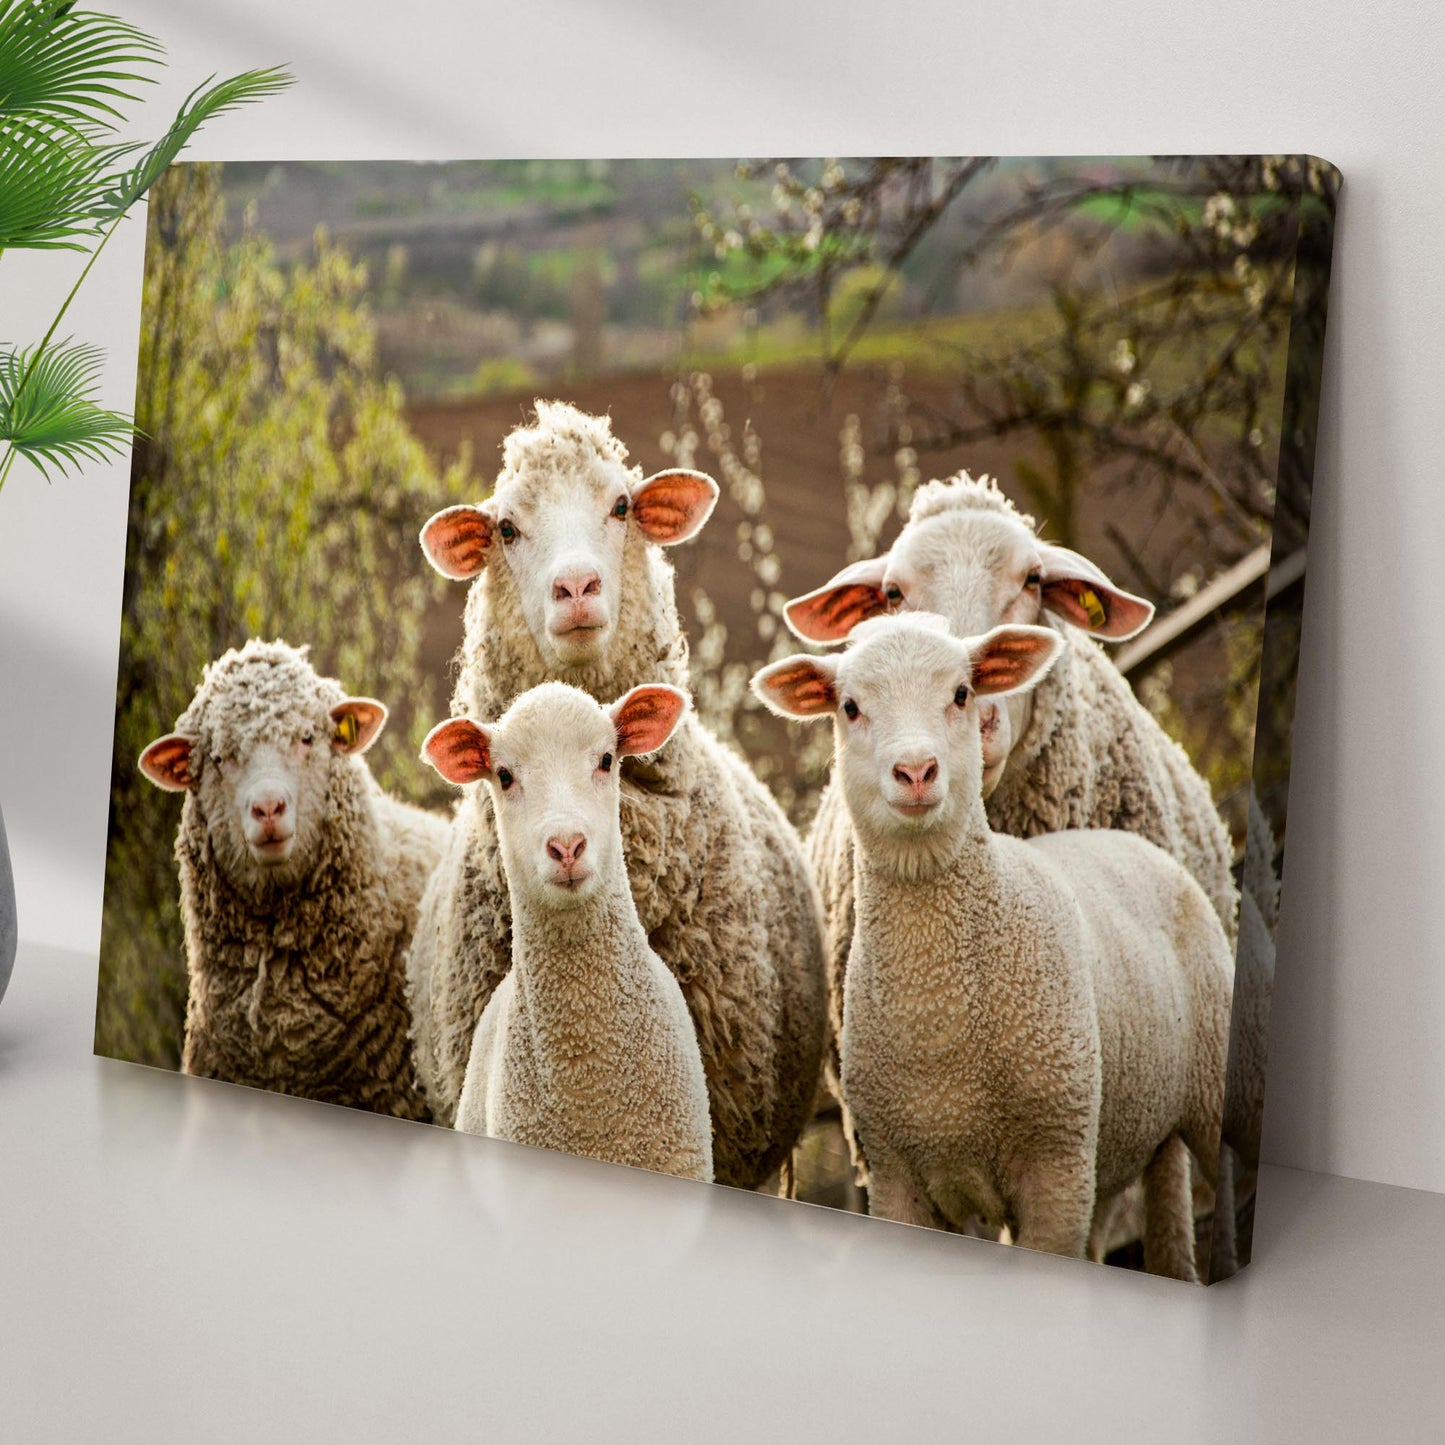 Curious Sheep Canvas Wall Art Style 1 - Image by Tailored Canvases